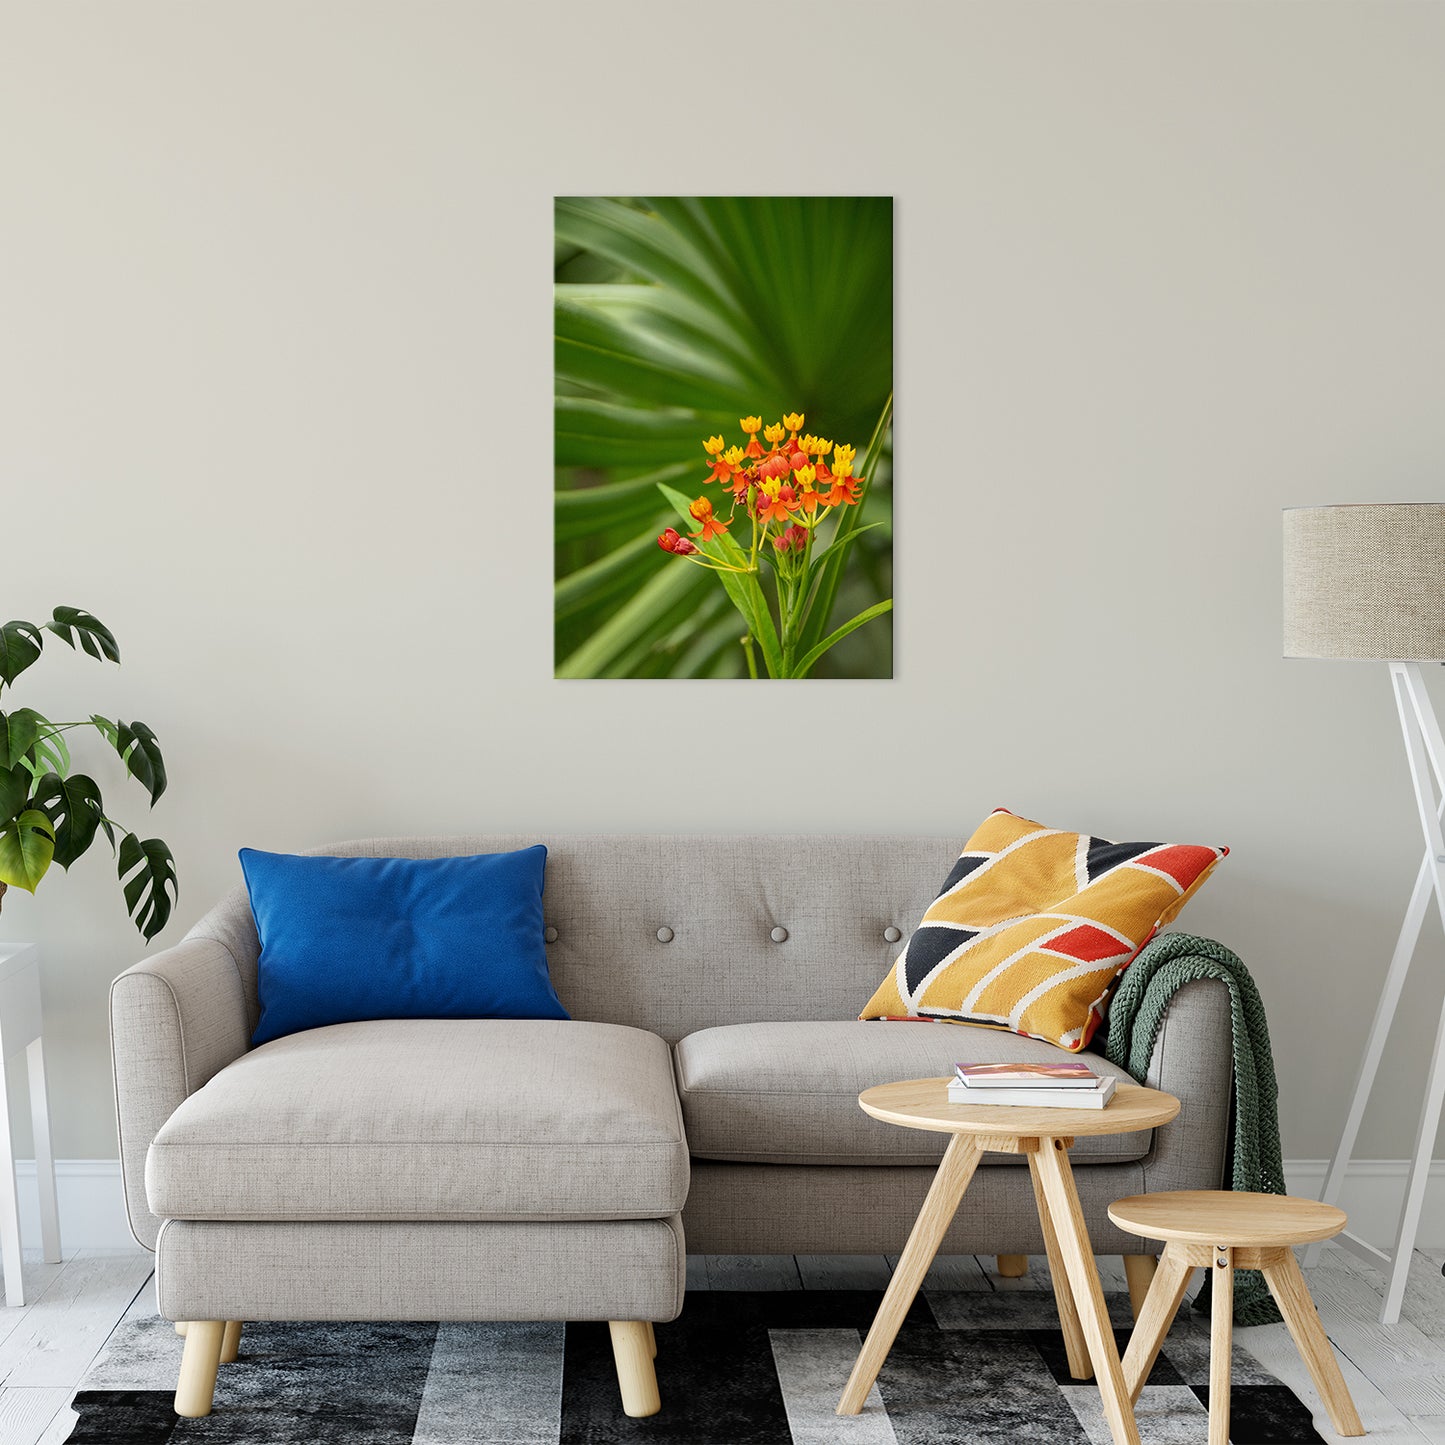 Bloodflowers & Palm Color Floral Nature Photo Fine Art Canvas Wall Art Prints 24" x 36" - PIPAFINEART